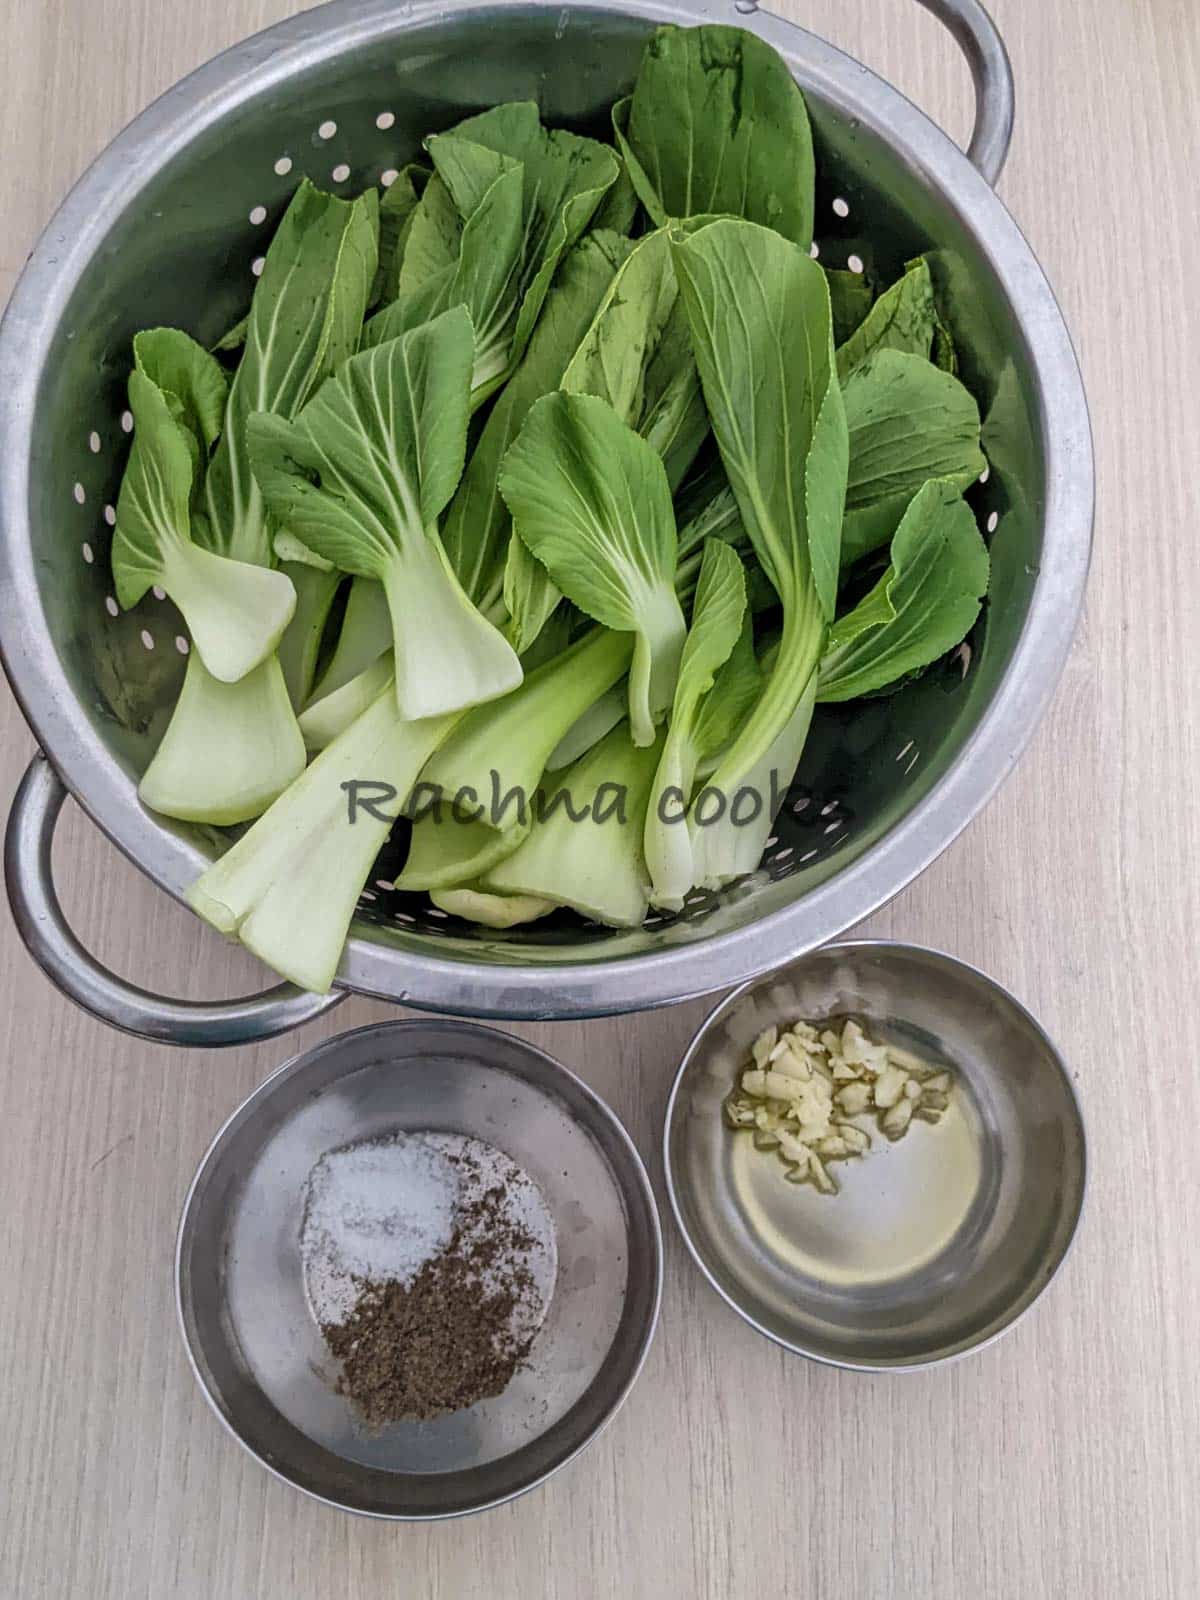 Washed and dried bok choy, salt, pepper in a shallow bowl. Virgin olive oil and minced garlic in another bowl.